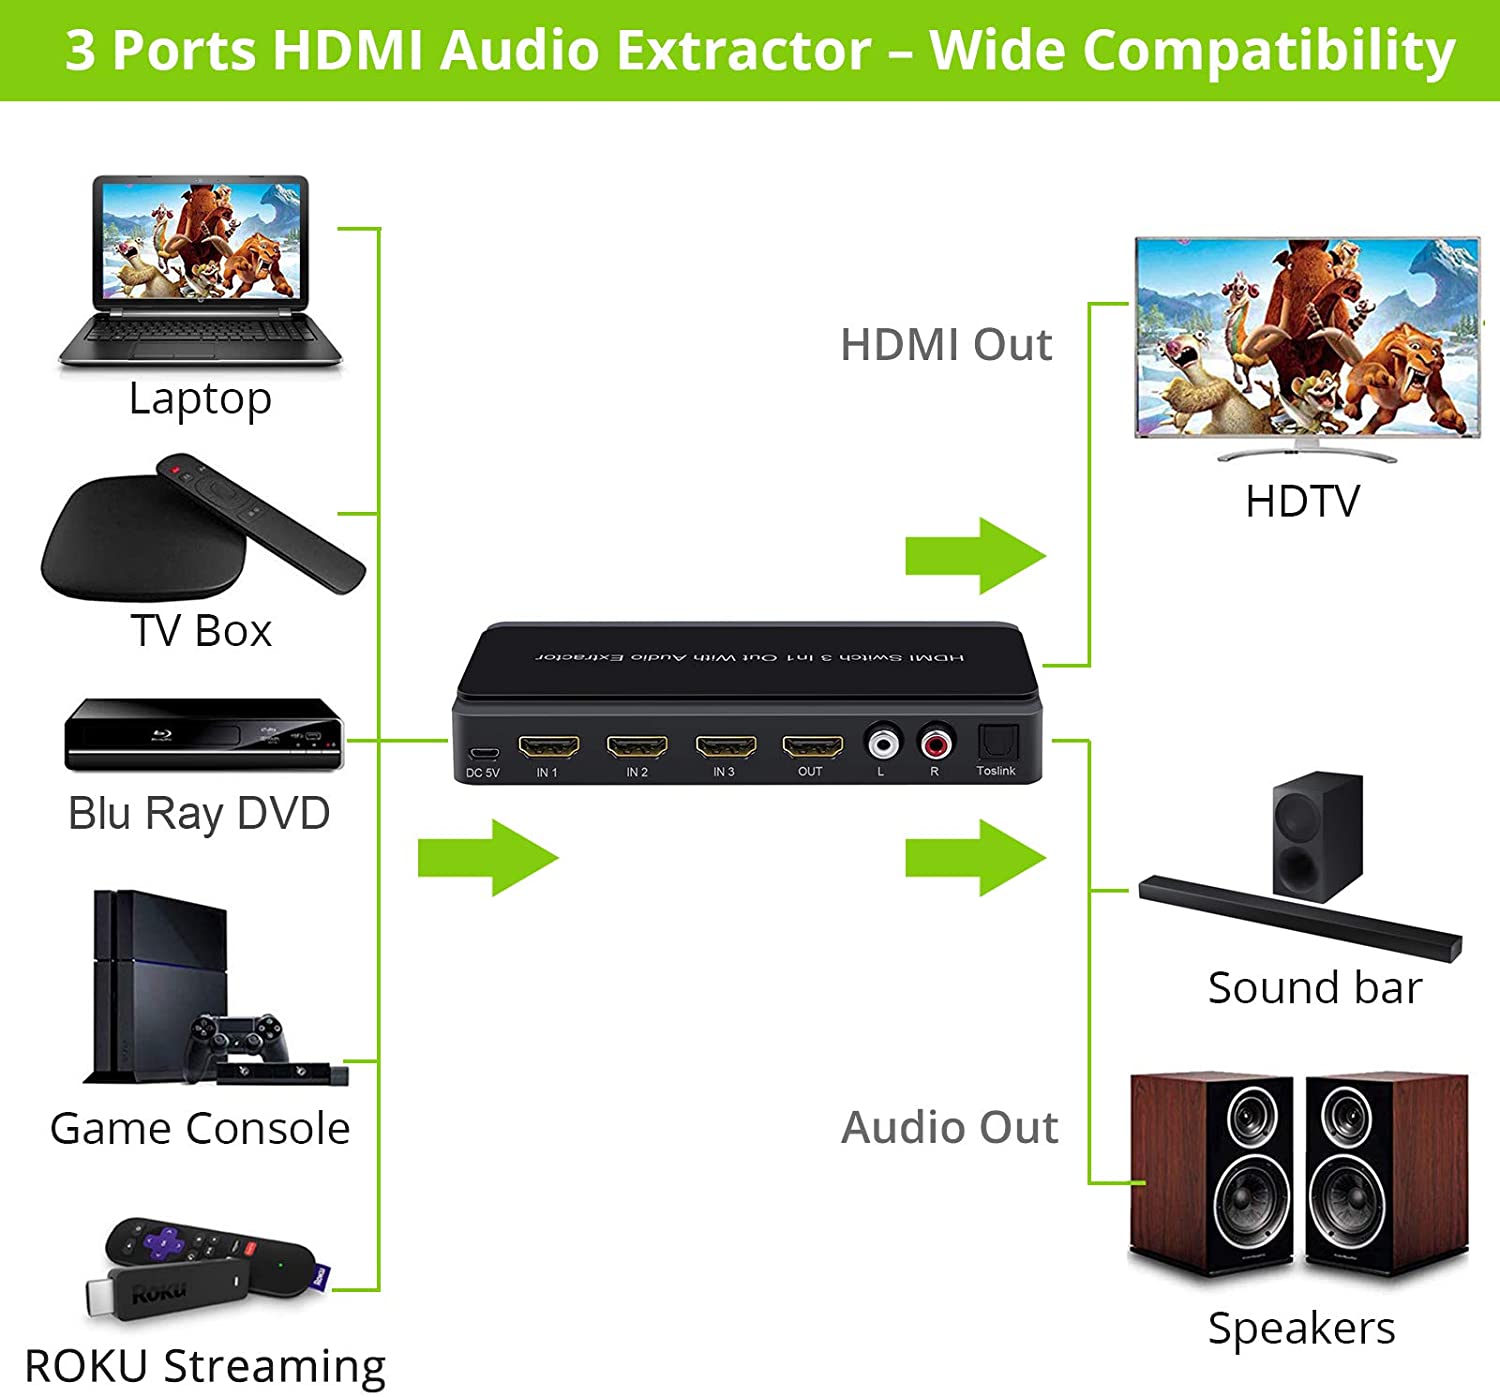 LiNKFOR 4K@60Hz 3D HDMI Audio Extractor 3x1 HDMI 2.0 Switch with Remote Control HDMI Audio Splitter with Toslink RCA Audio Output for HDTV TV Box PS4 PS3 DVD Laptop